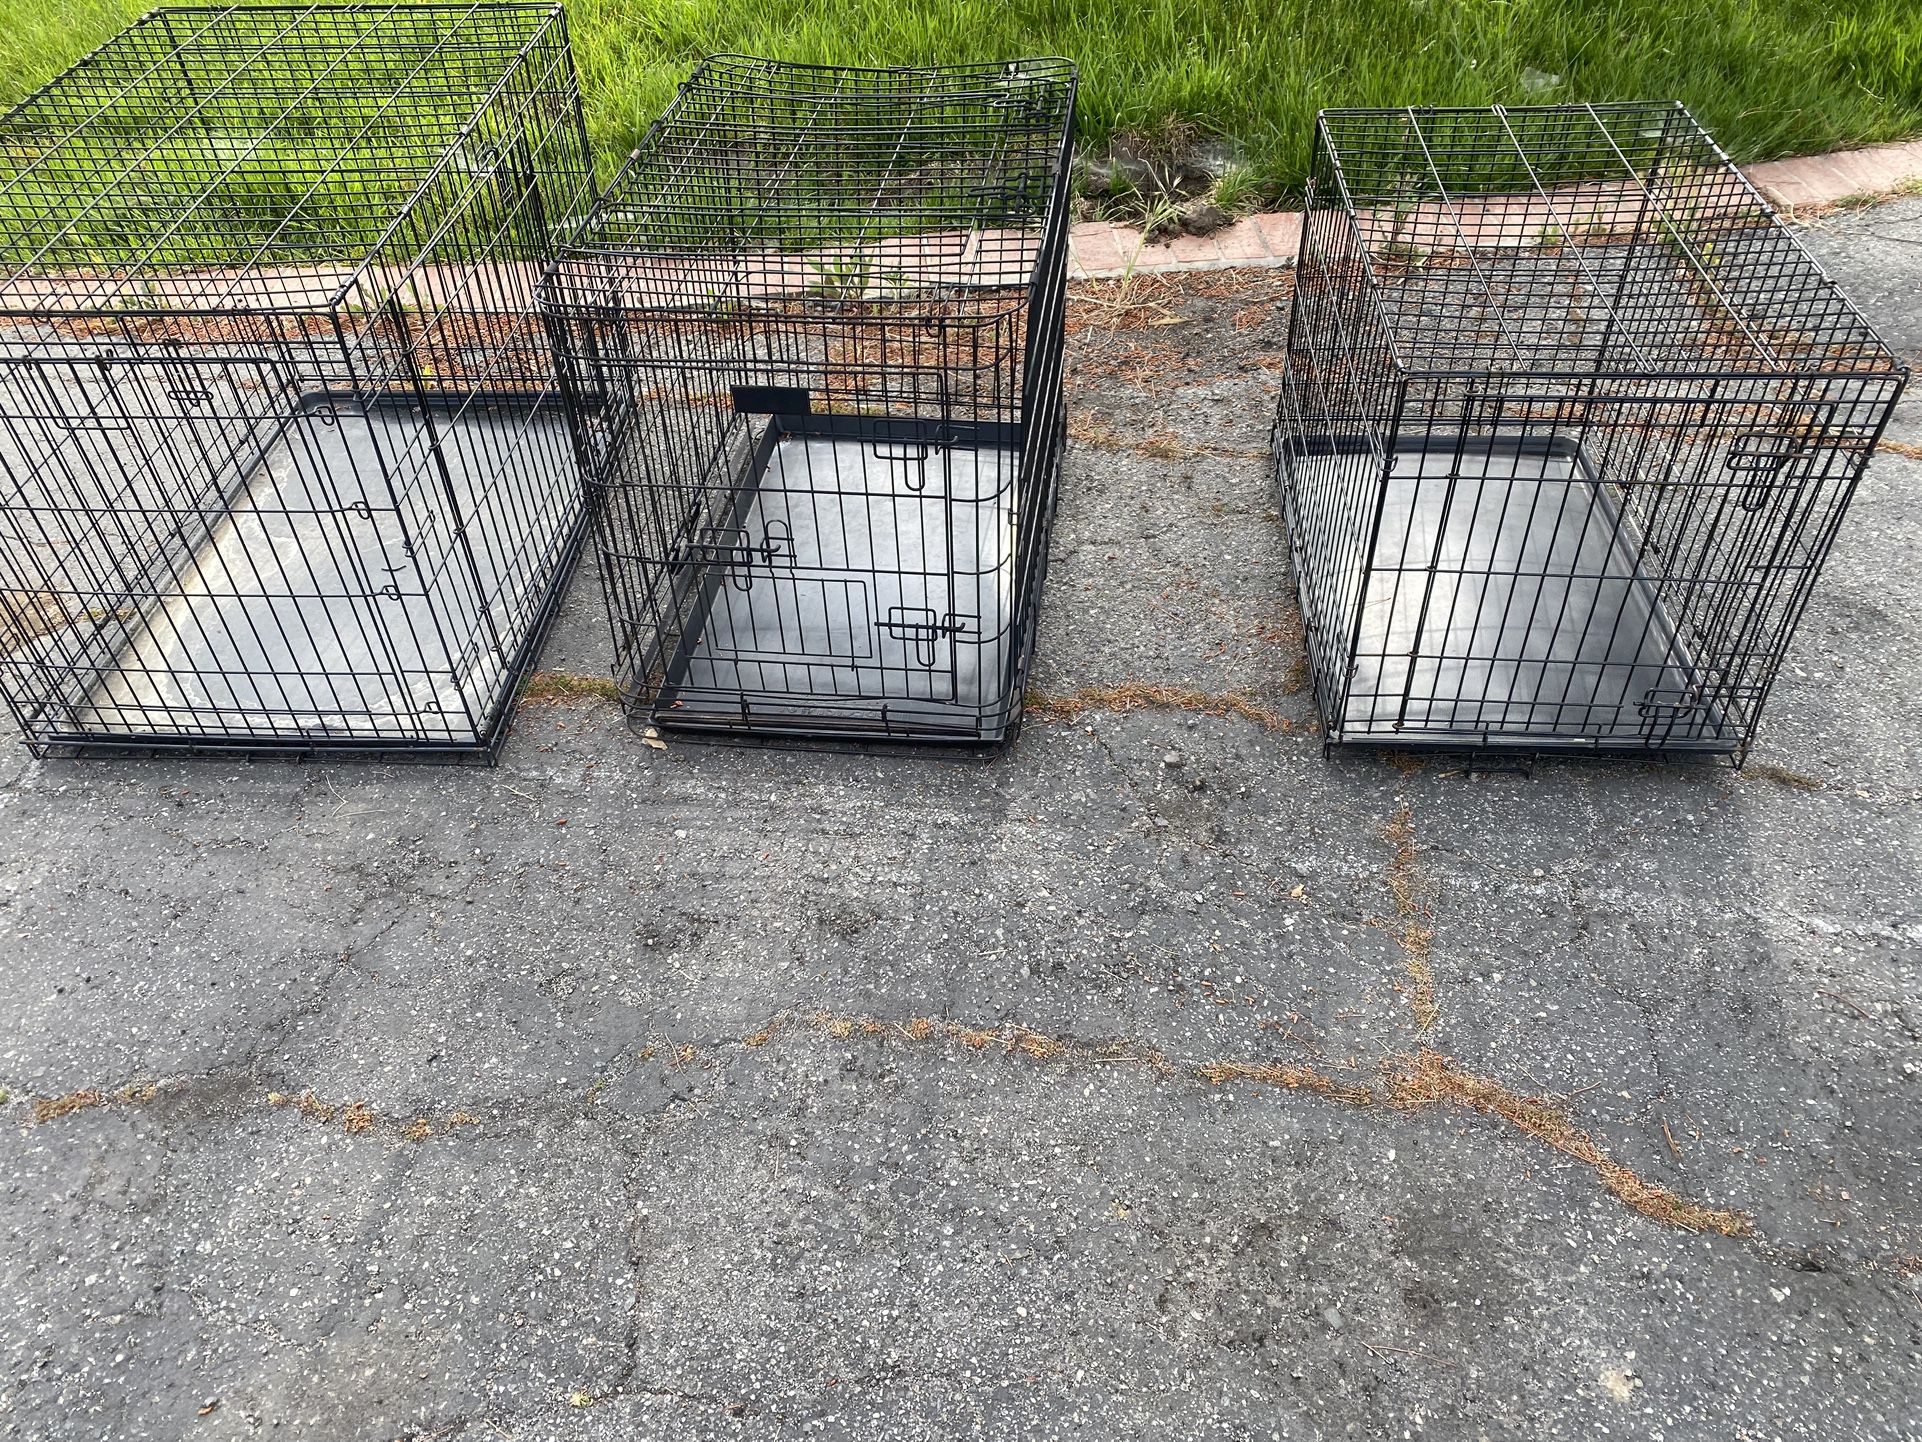 Dog Kennels /carriers 